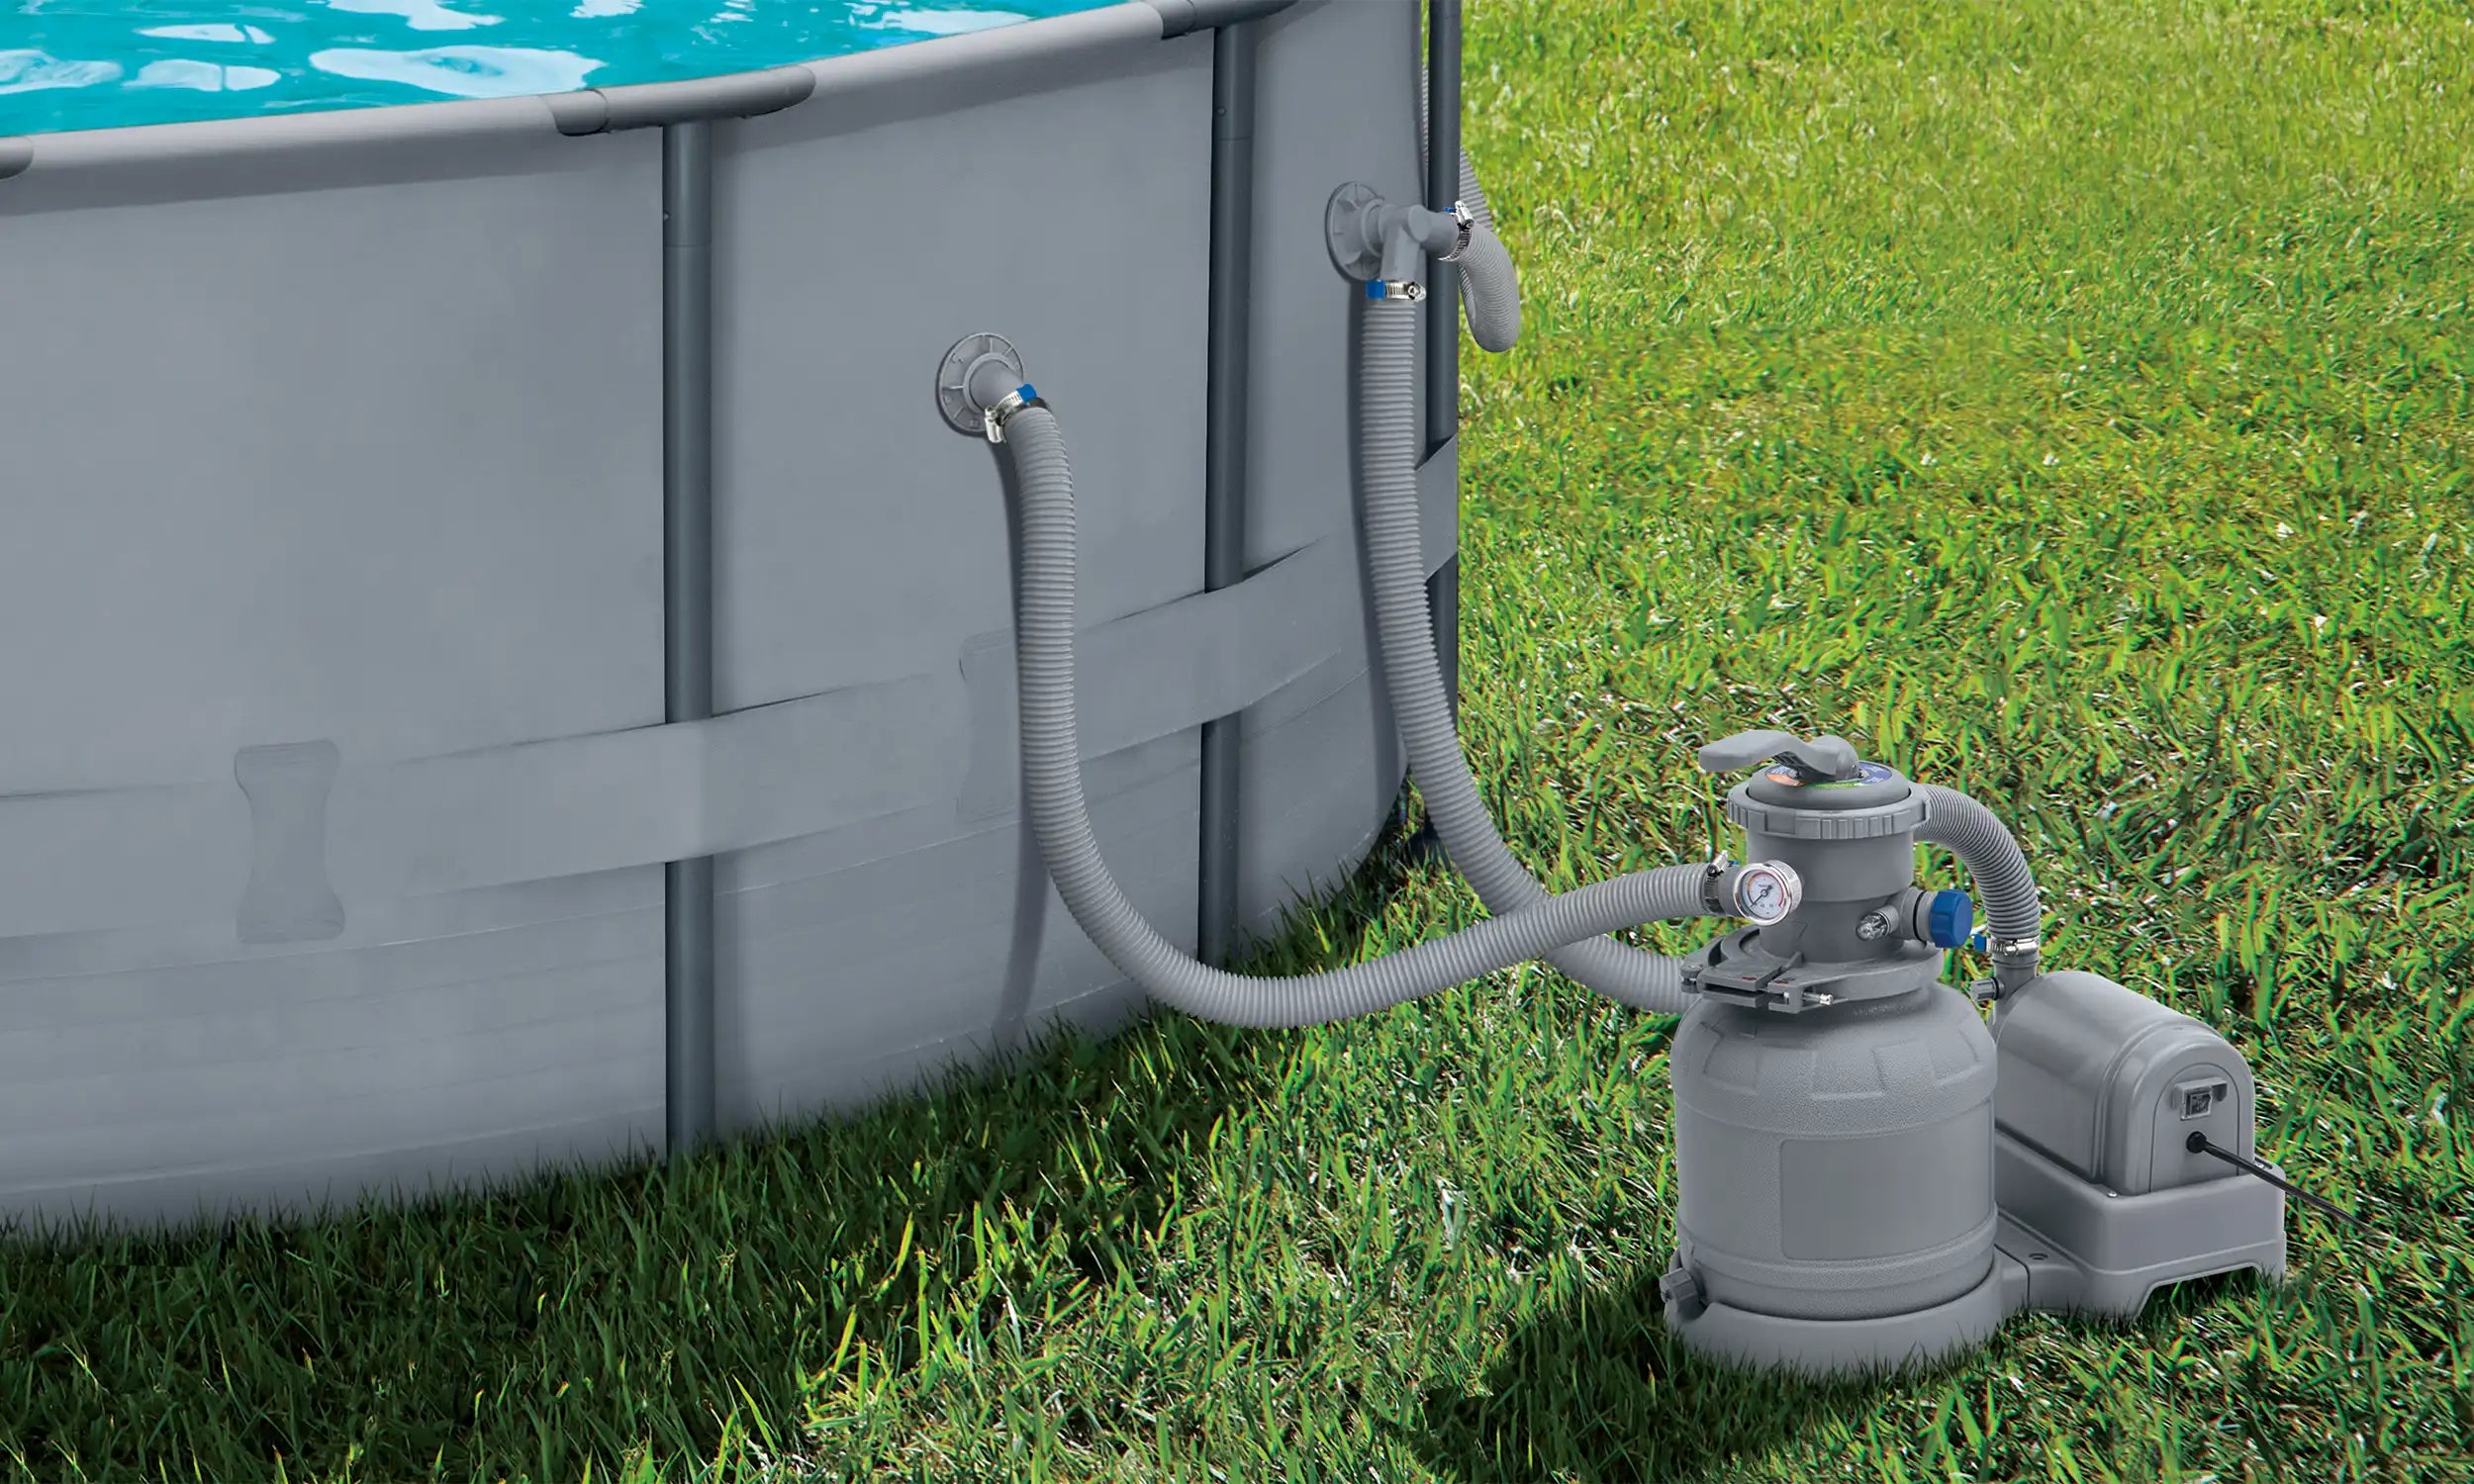 Funsicle 12" Sand Filter Pump attached to a pool on a grass field